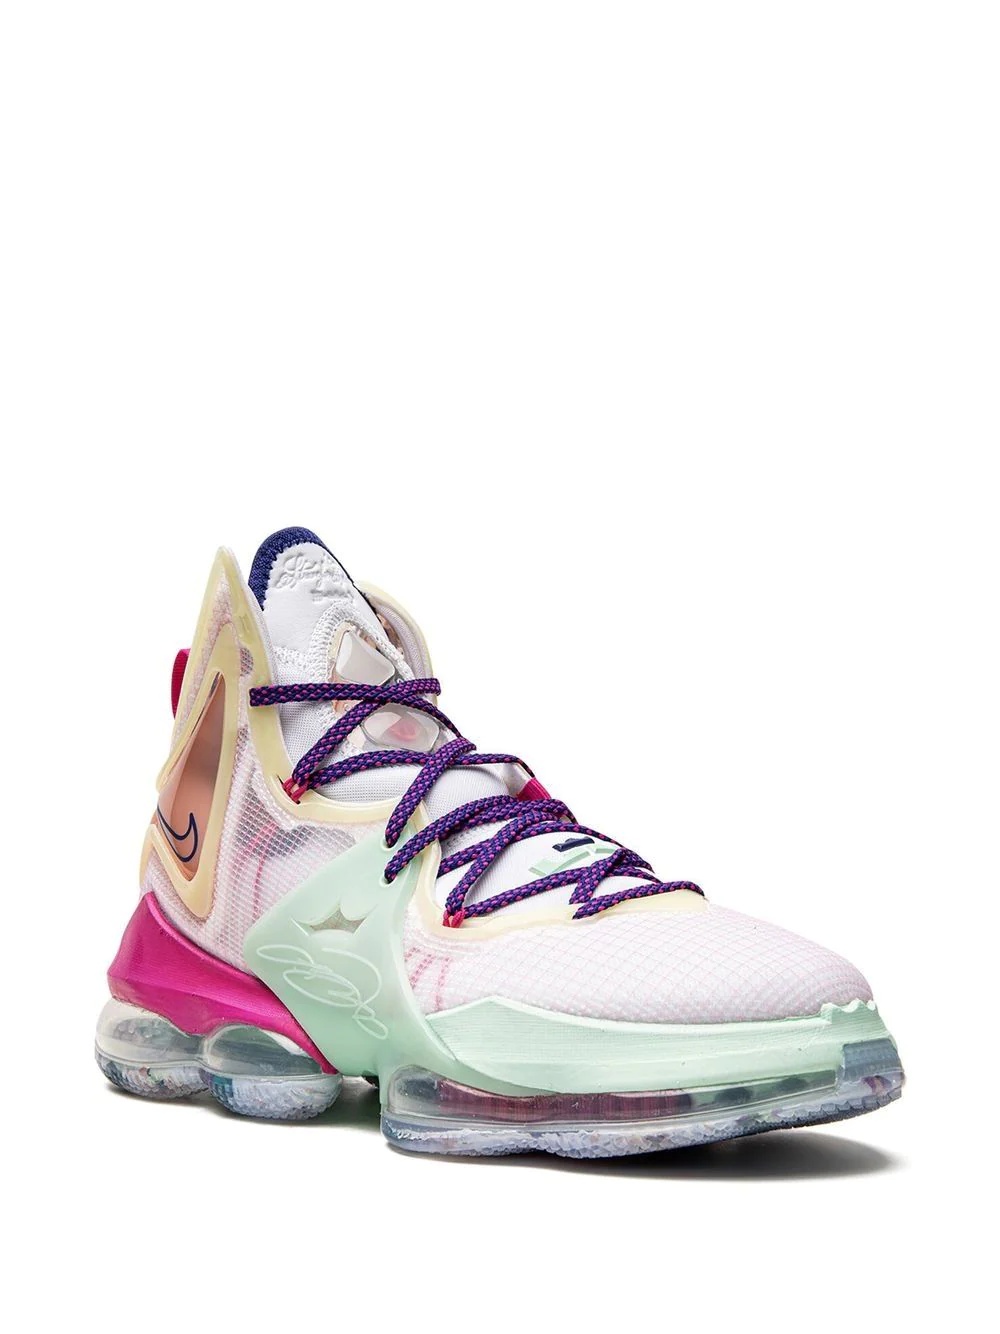 LeBron 19 "Valentine's Day" sneakers - 2